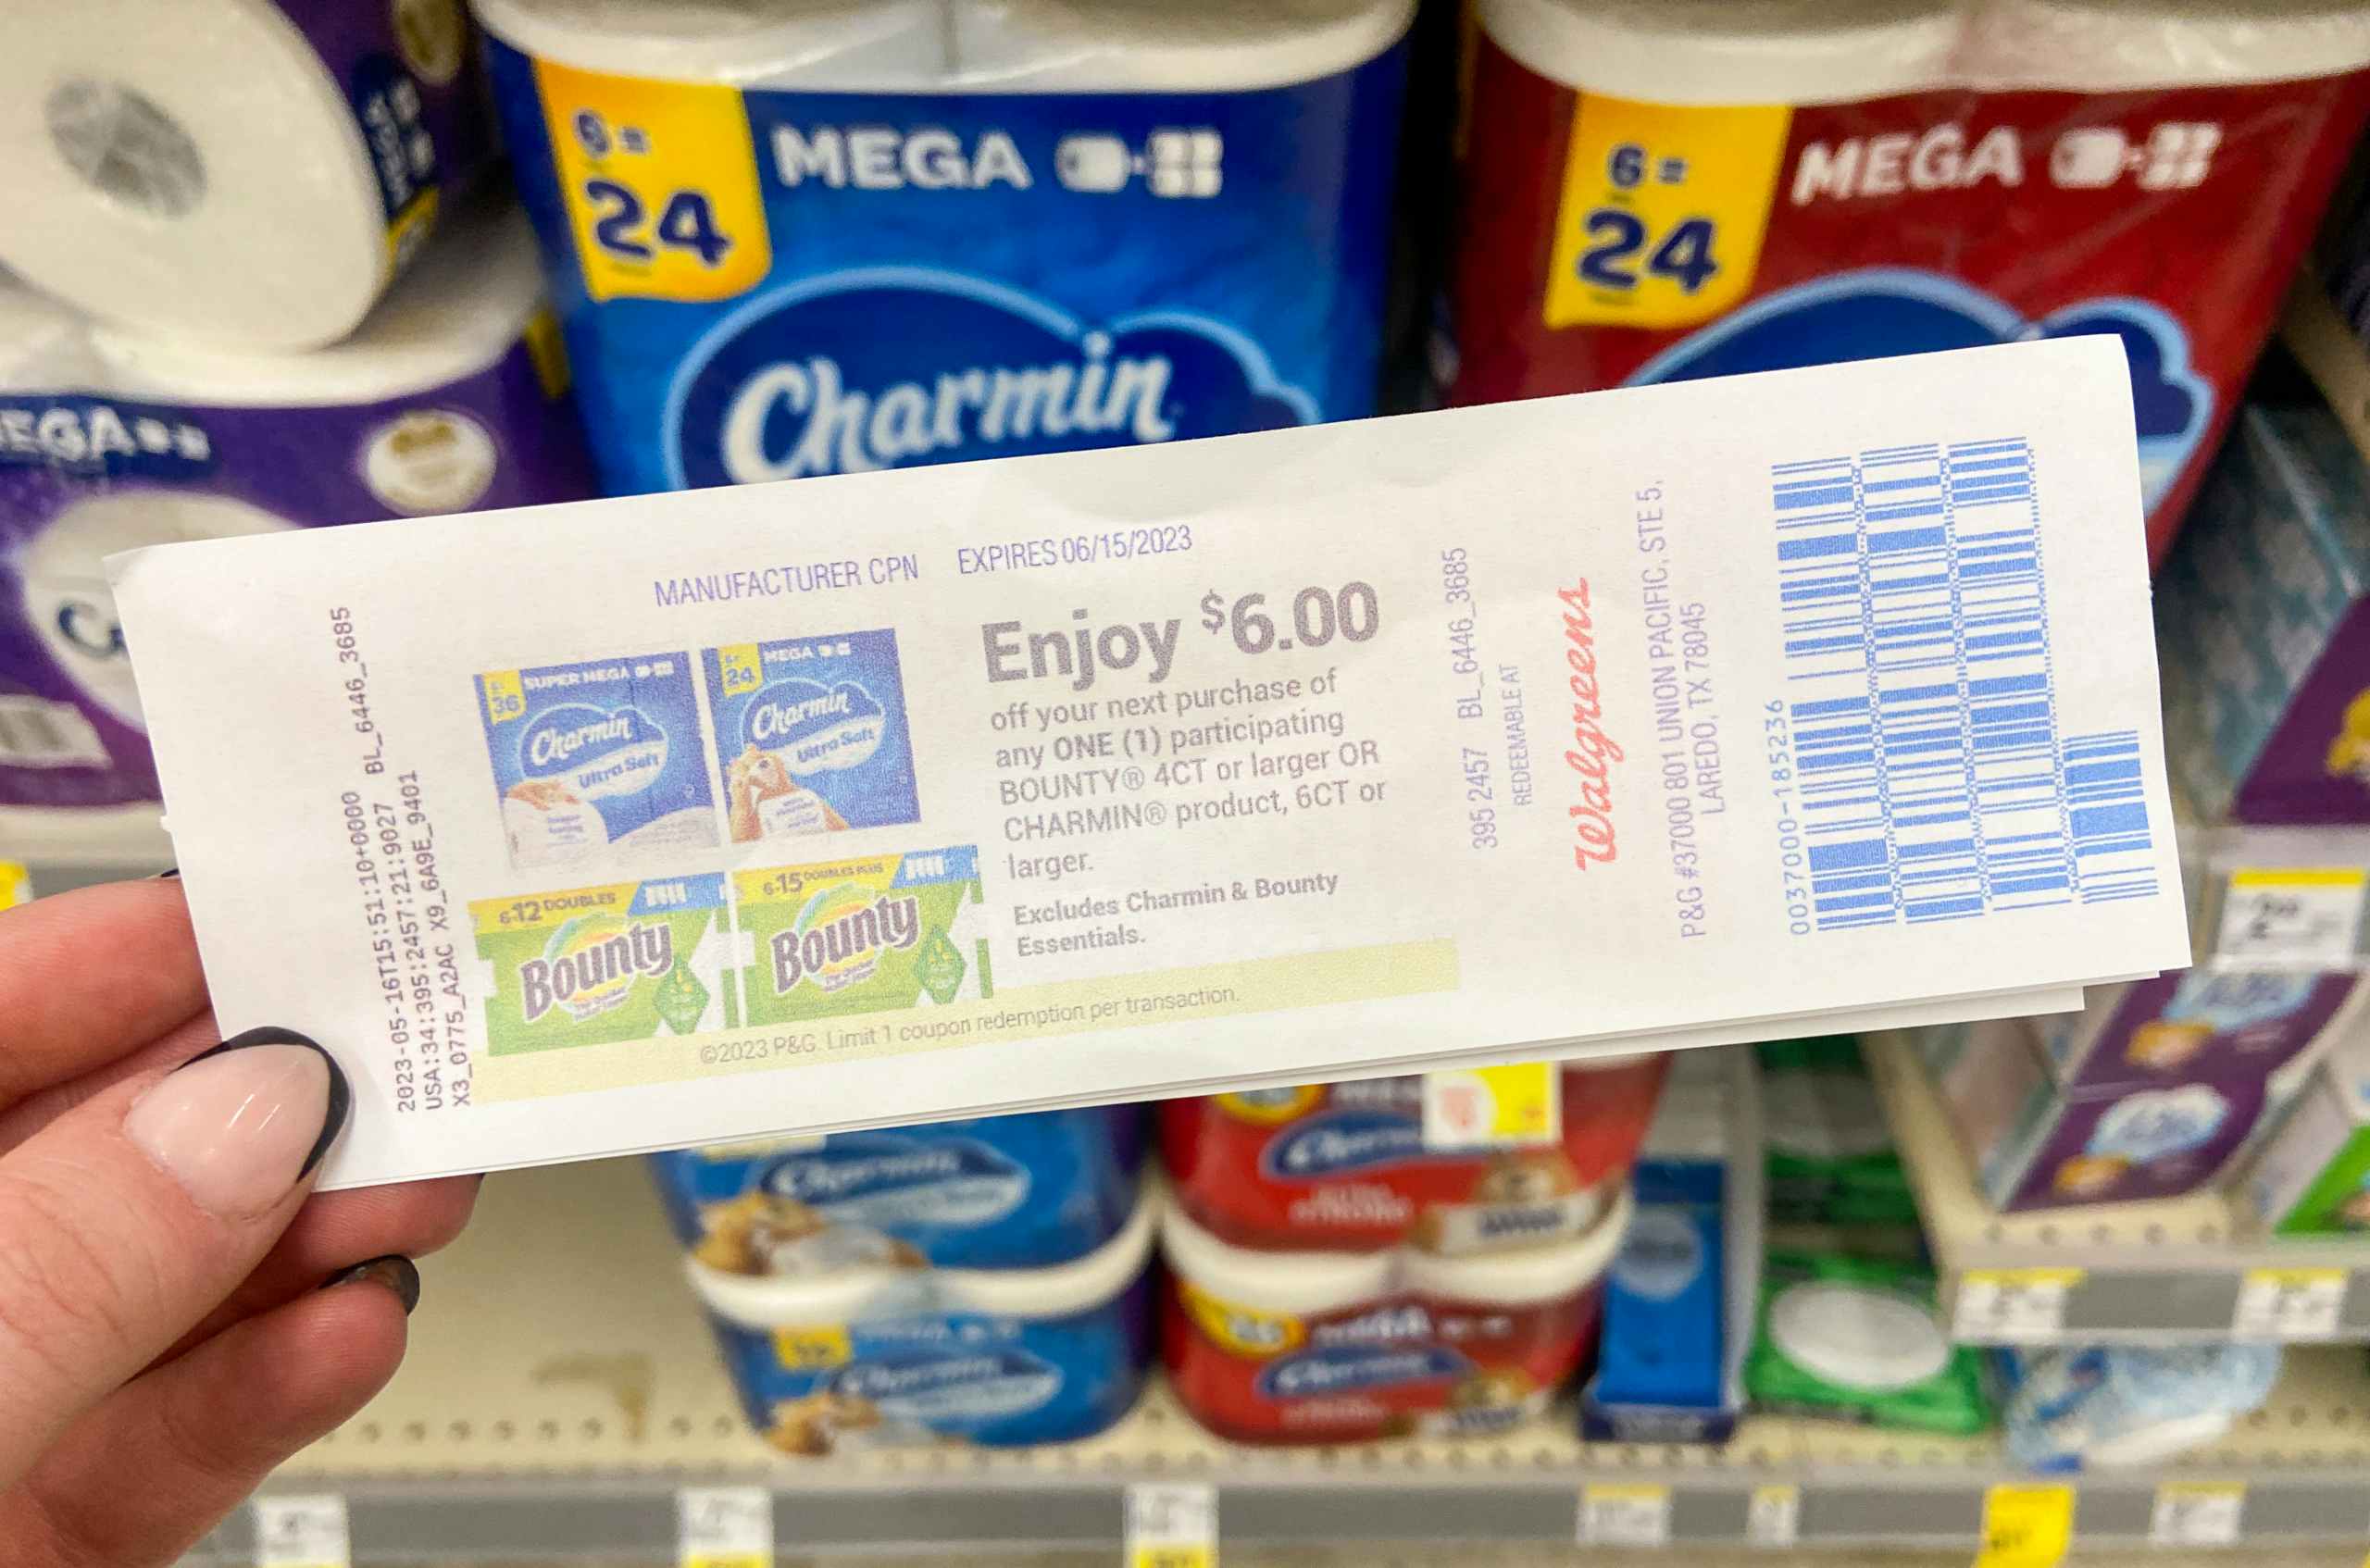 hand holding a charmin and bounty walgreens catalina coupon in a store aisle